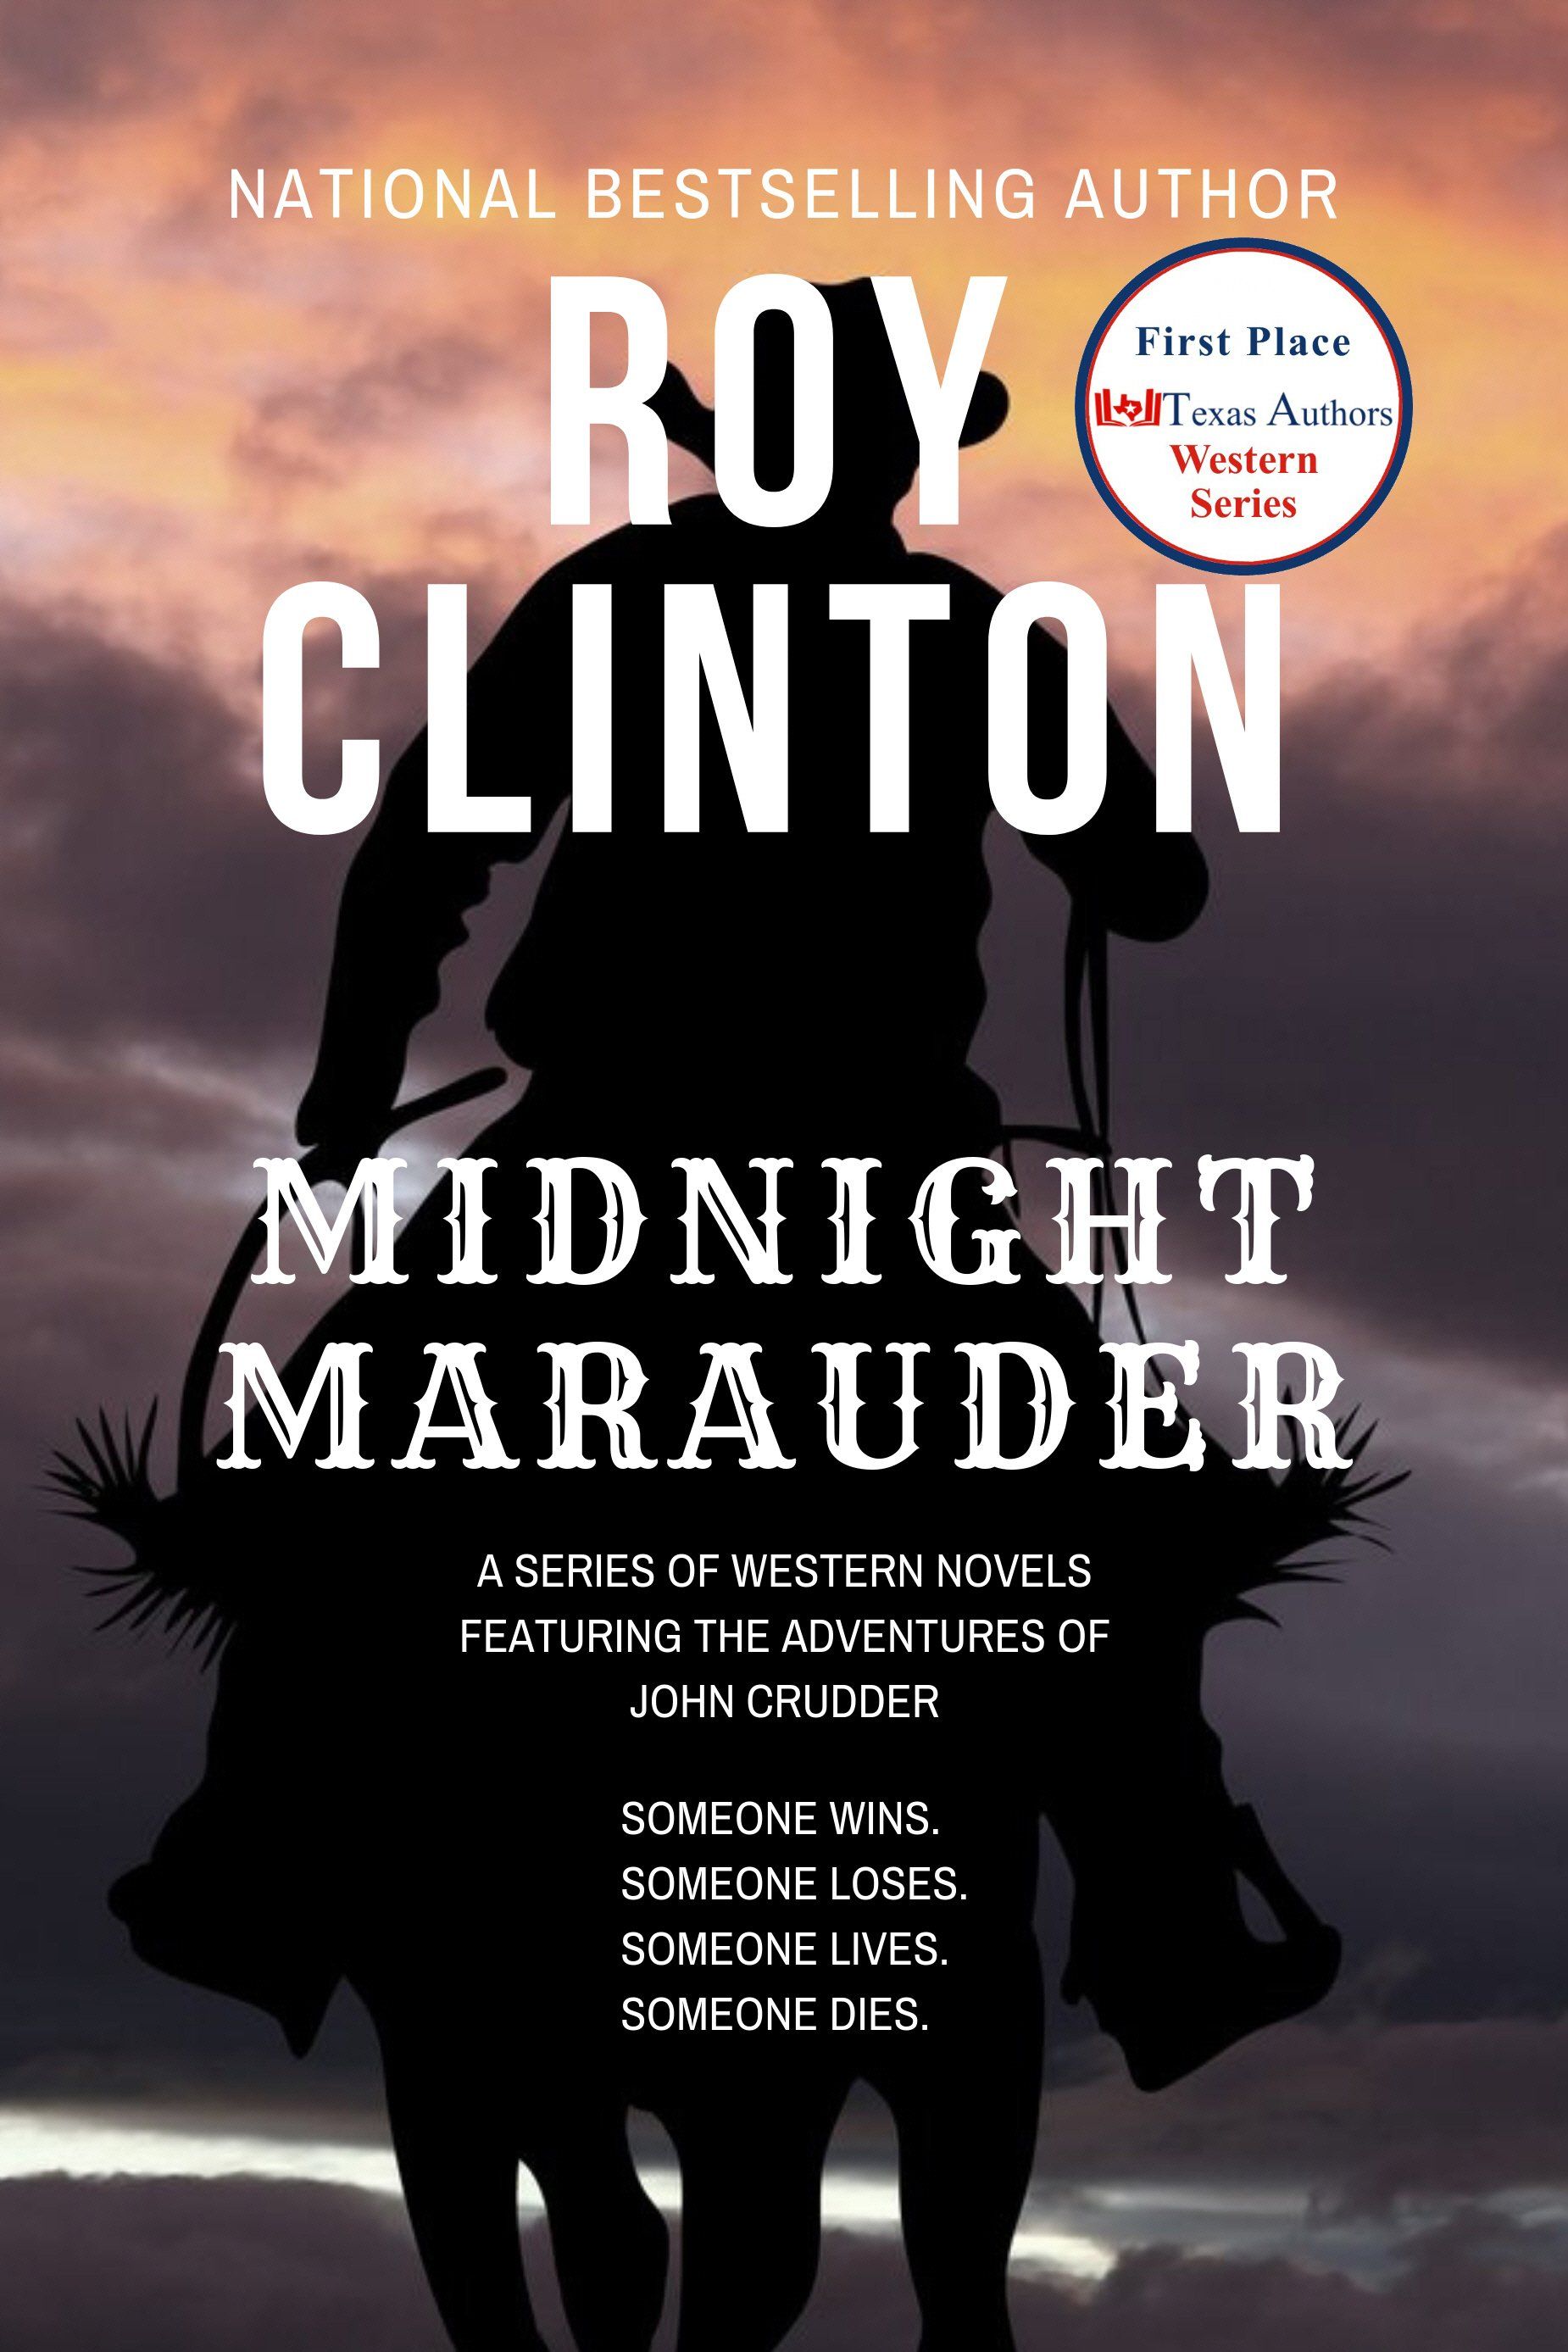 Roy Clinton, National Bestselling Author, Midnight Marauder | Top Westerns Publishing